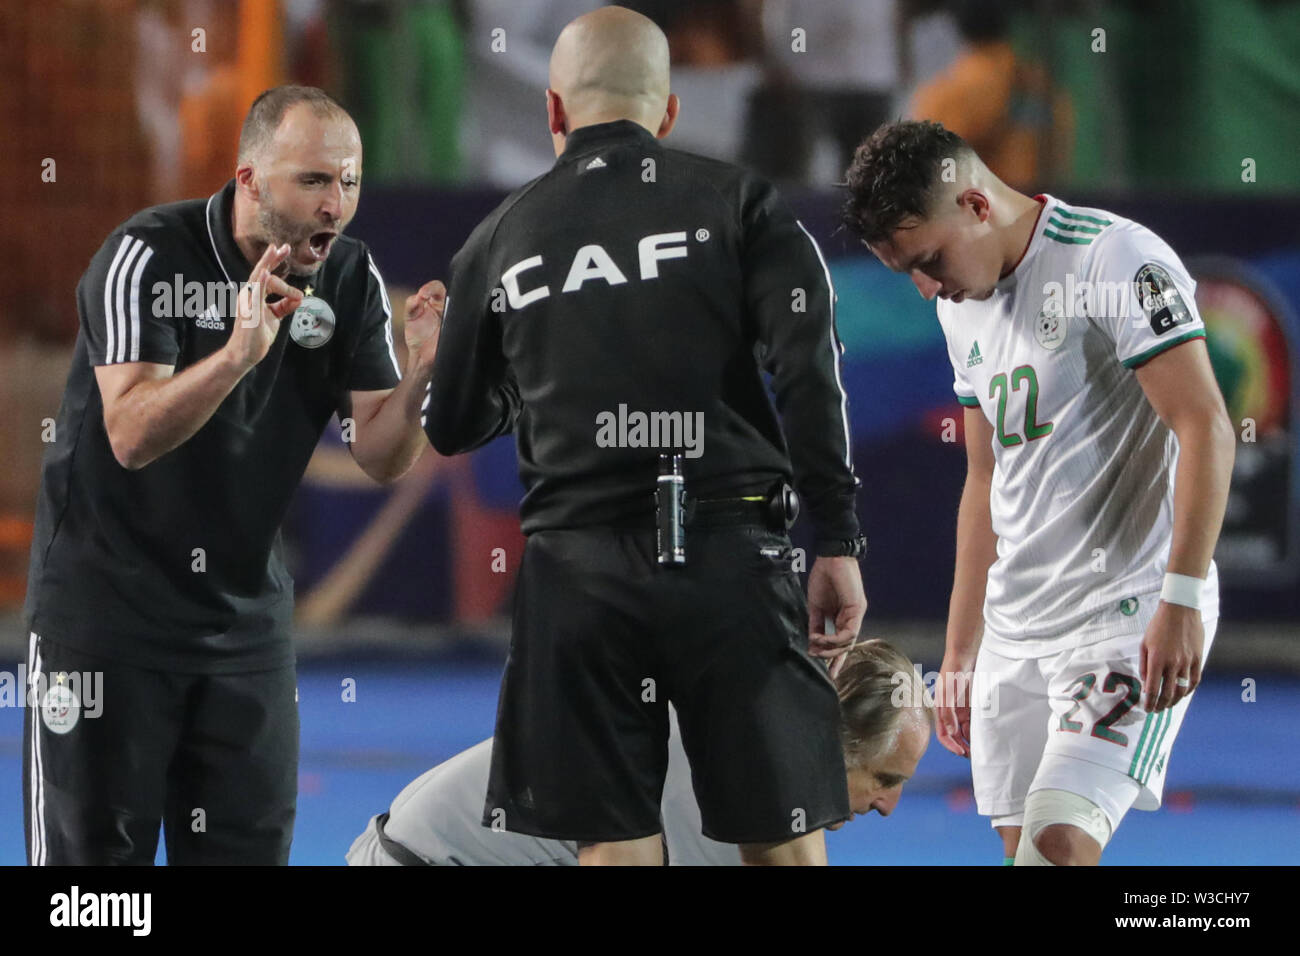 Cairo, Egypt. 14th July, 2019. Algeria's national team coach Djamel Belmadi (L) speaks with the referee during the 2019 Africa Cup of Nations semi-final soccer match between Algeria and Nigeria at the Cairo International Stadium. Credit: Oliver Weiken/dpa/Alamy Live News Stock Photo